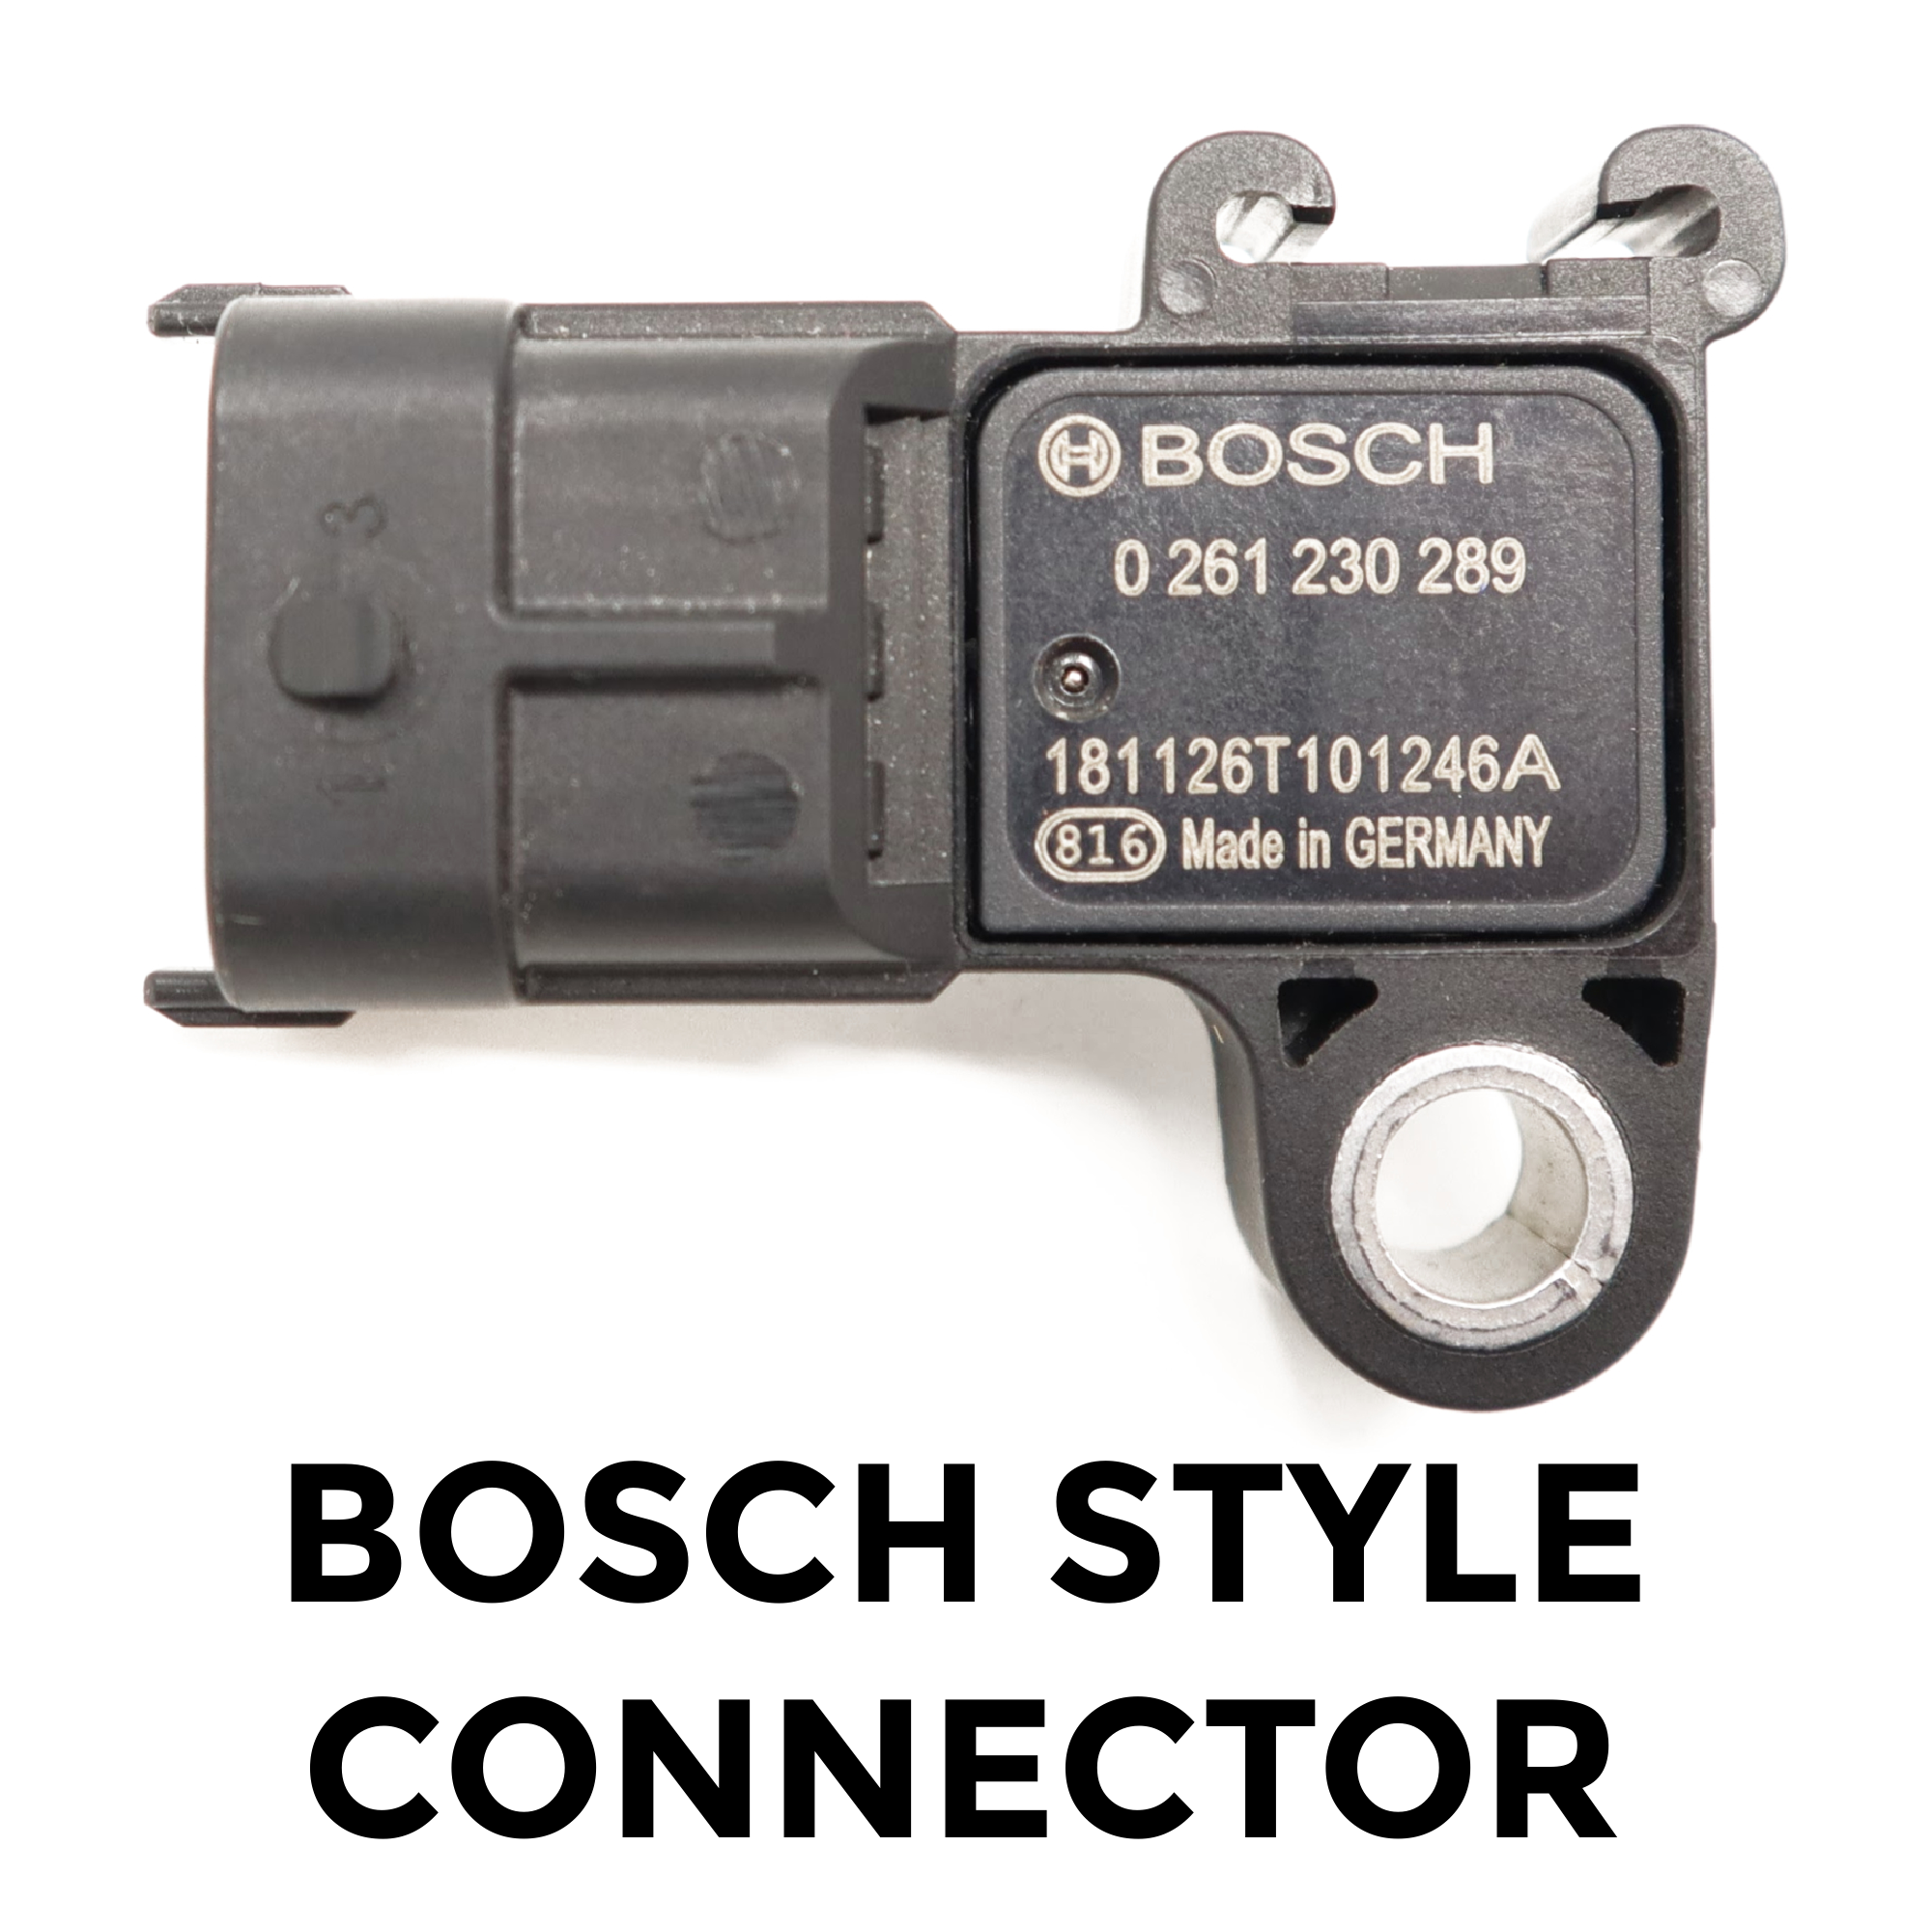 Bosch Style Connector